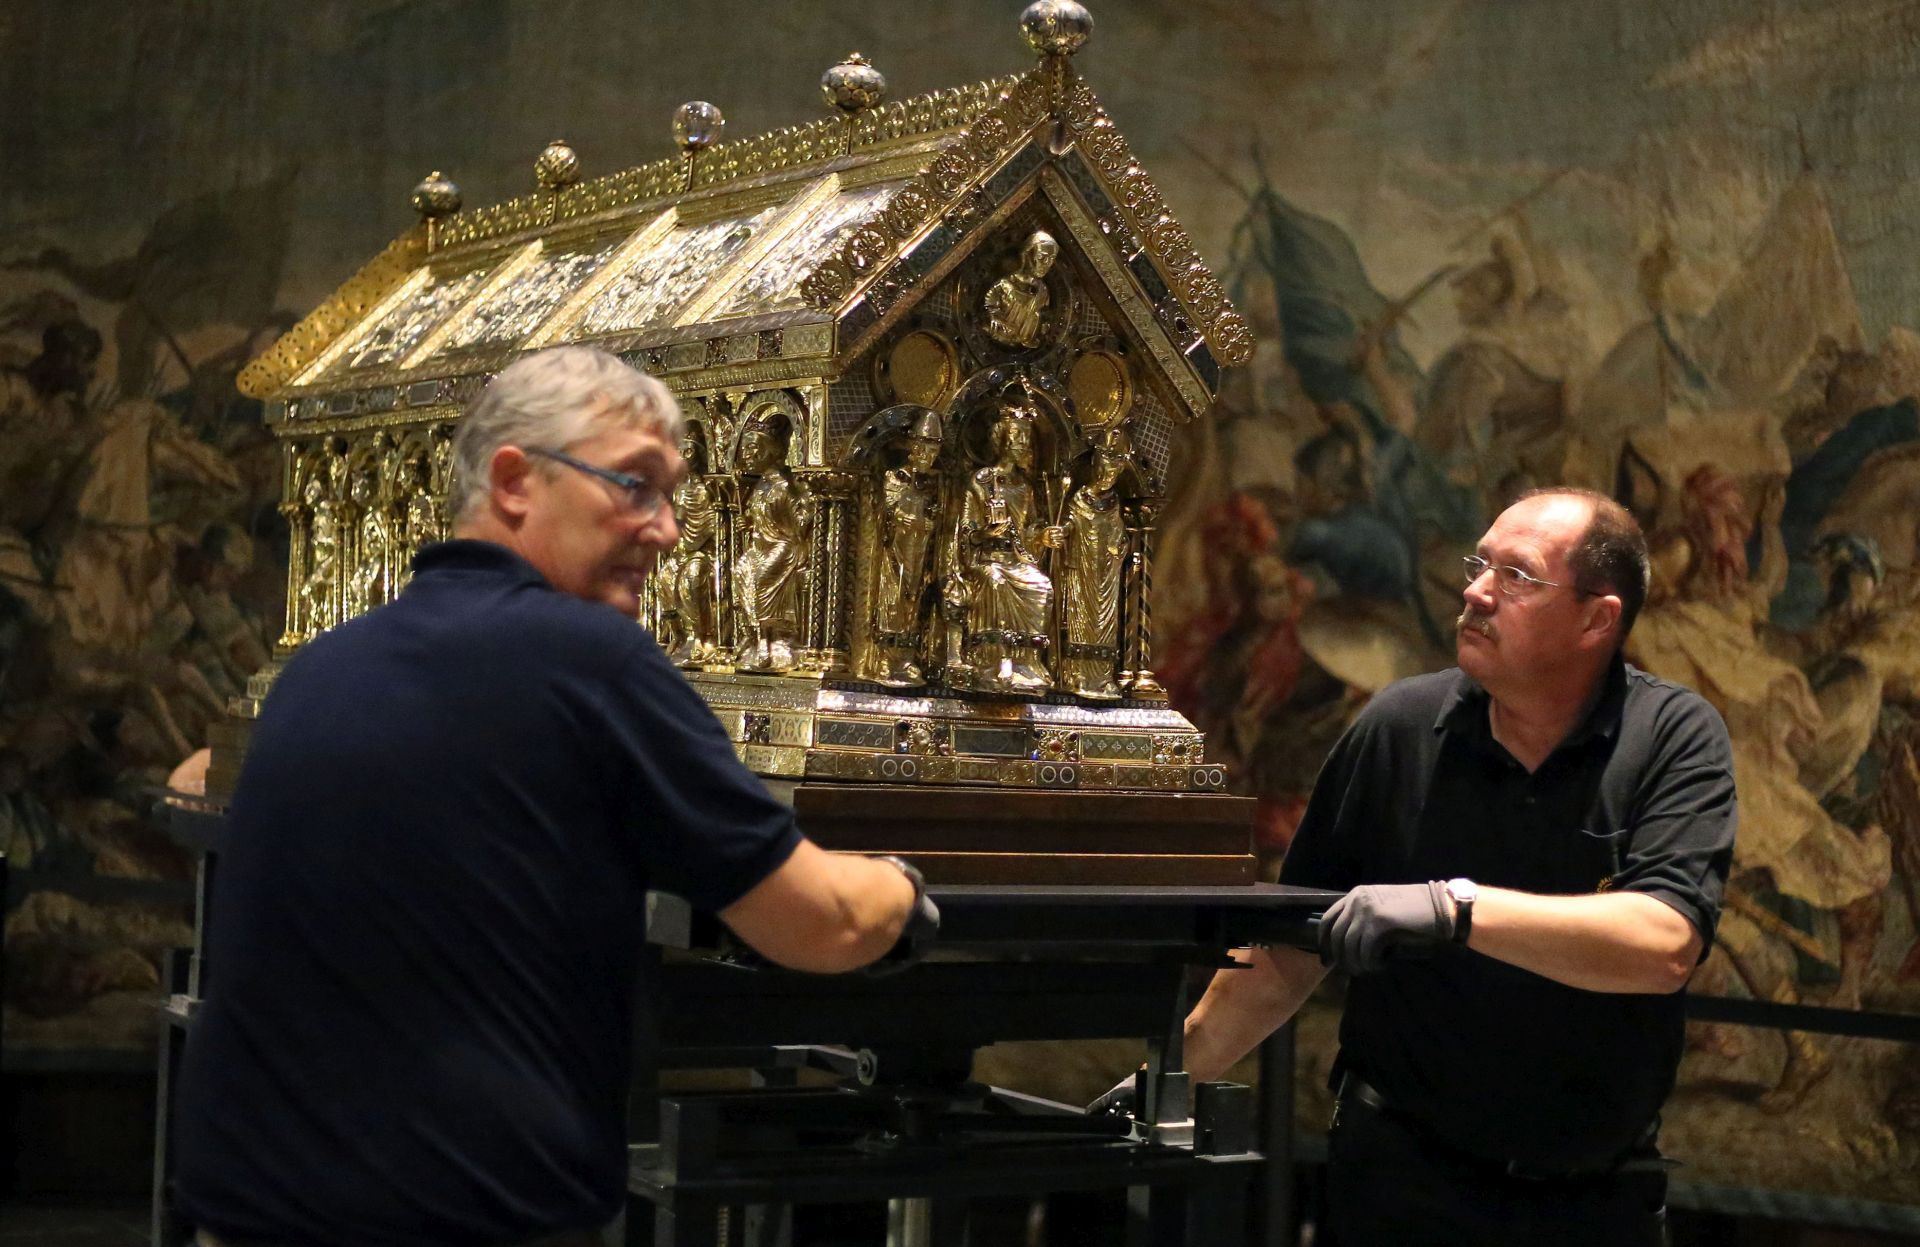 epa04856217 Employees of the Aachen diocese push the Shrine of Charlemagne at its new location at the Aachen Cathedral, in Aachen, Germany, 22 July 2015. The shrine has been moved from the choir hall back to its original position in the central structure of the cathedral. Charles the Great became the first Holy Roman Emperor in 800 AD.  EPA/OLIVER BERG